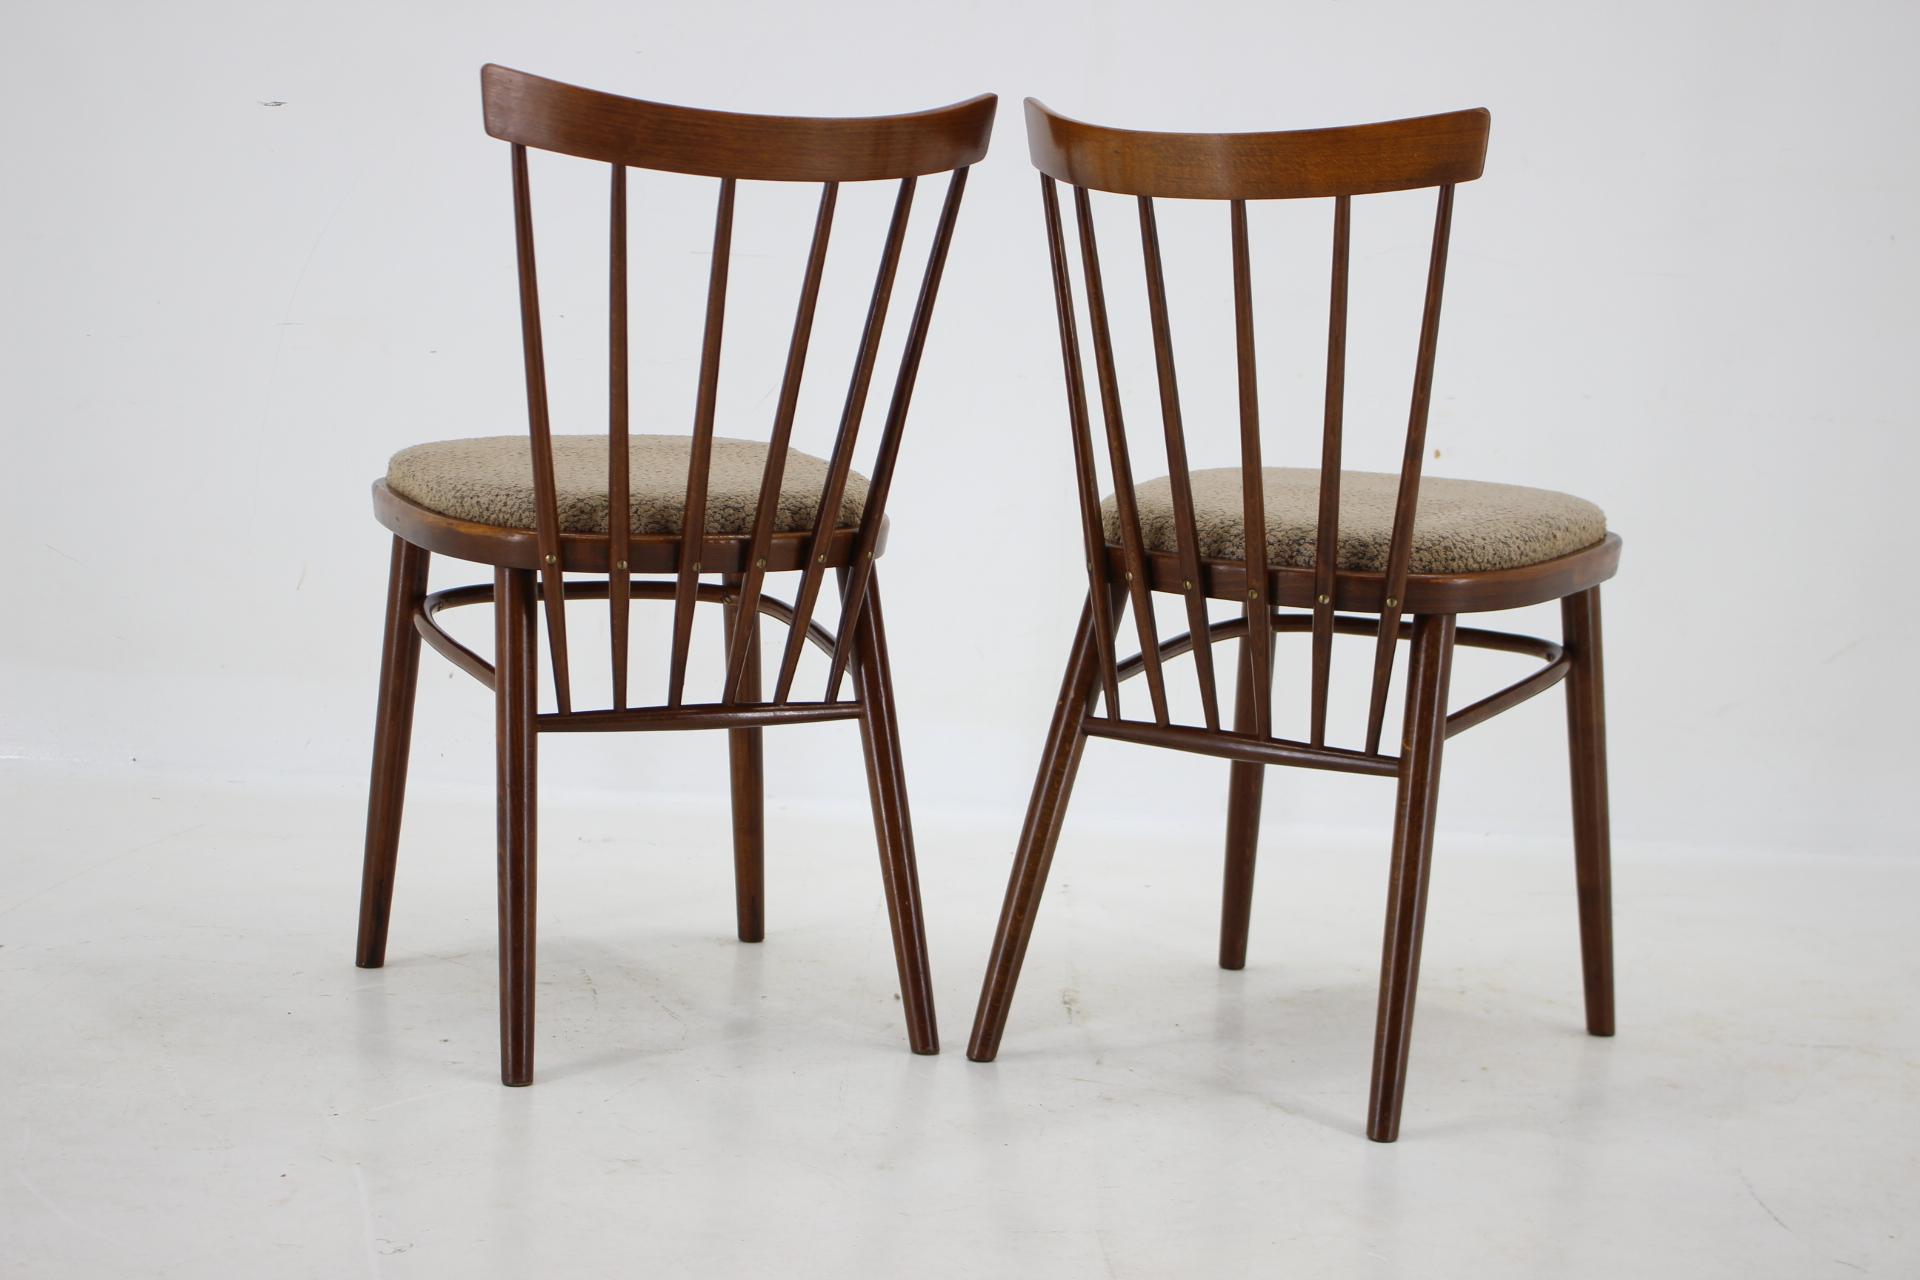 Fabric 1960s Set of 4 Dining Chairs by Tatra, Czechoslovakia For Sale